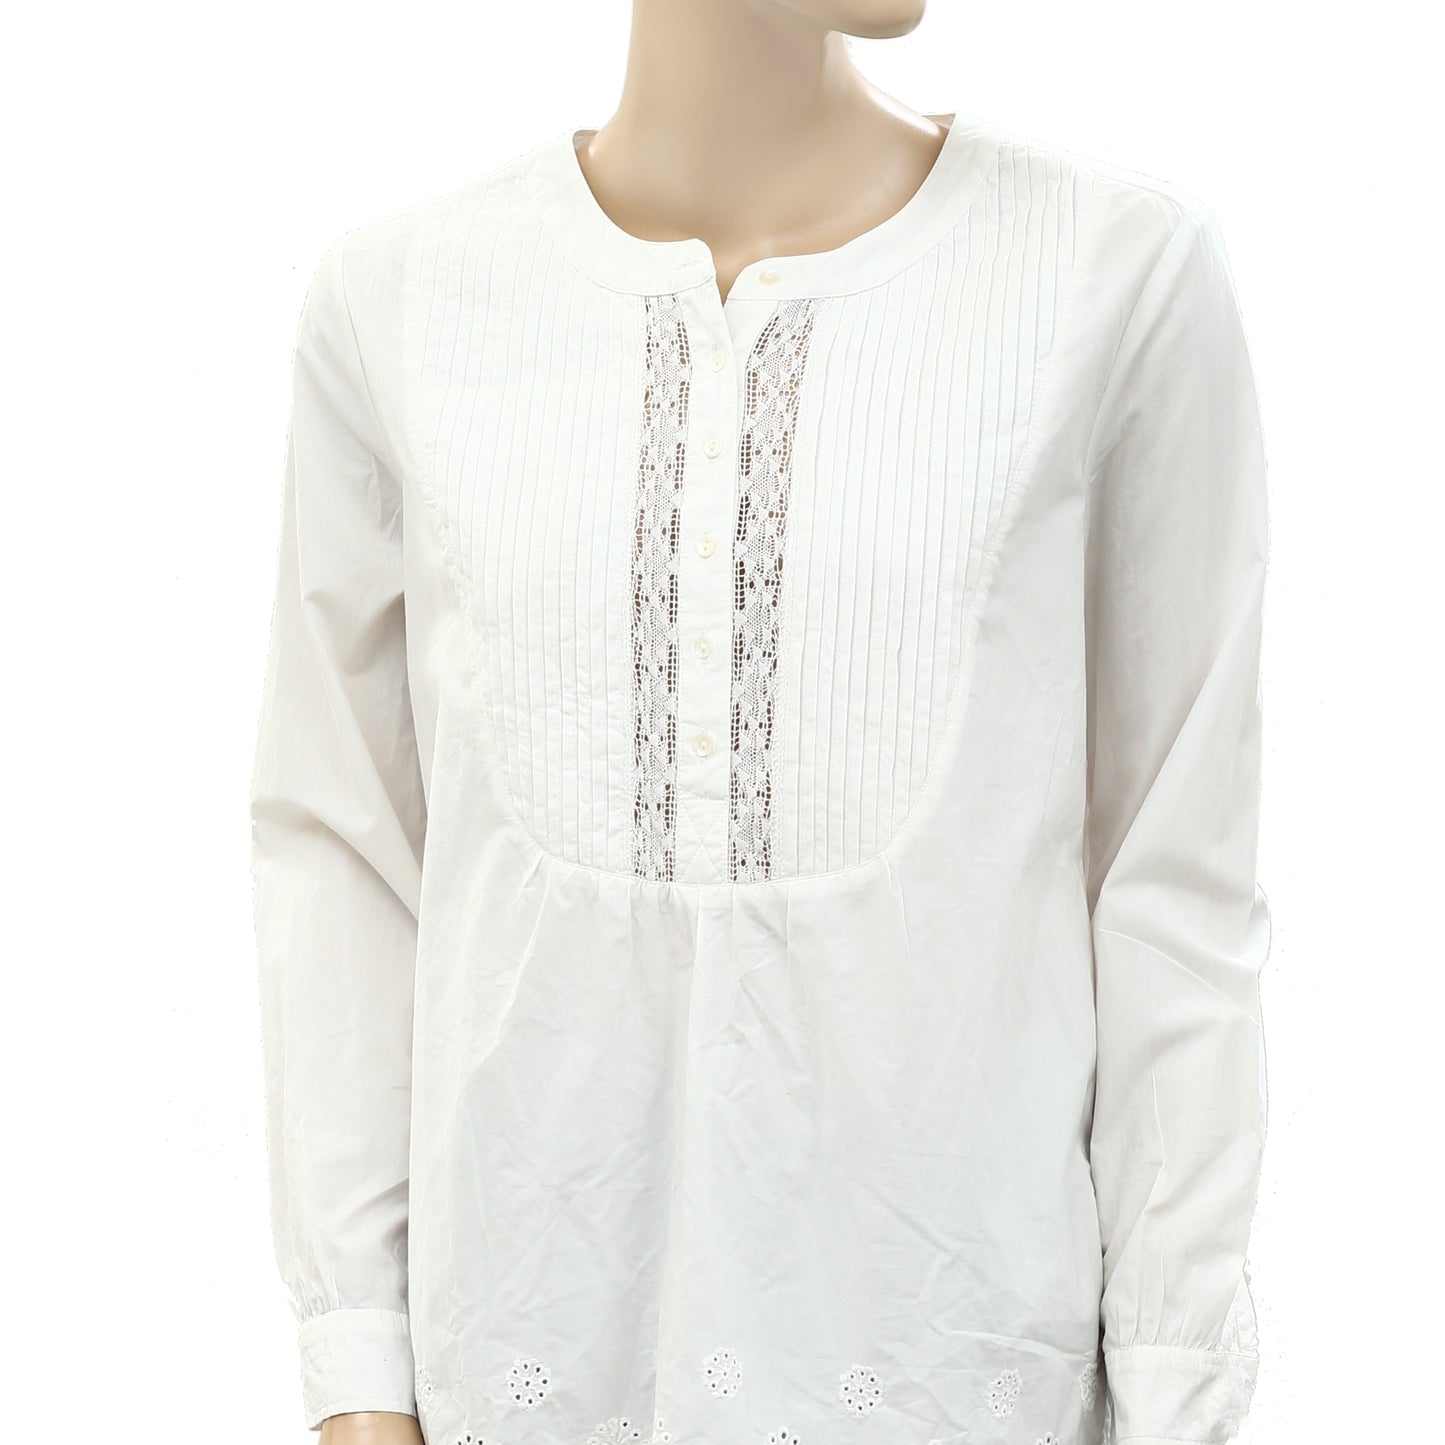 Odd Molly Anthropologie Lace Eyelet Embroidered Shirt Tunic Top